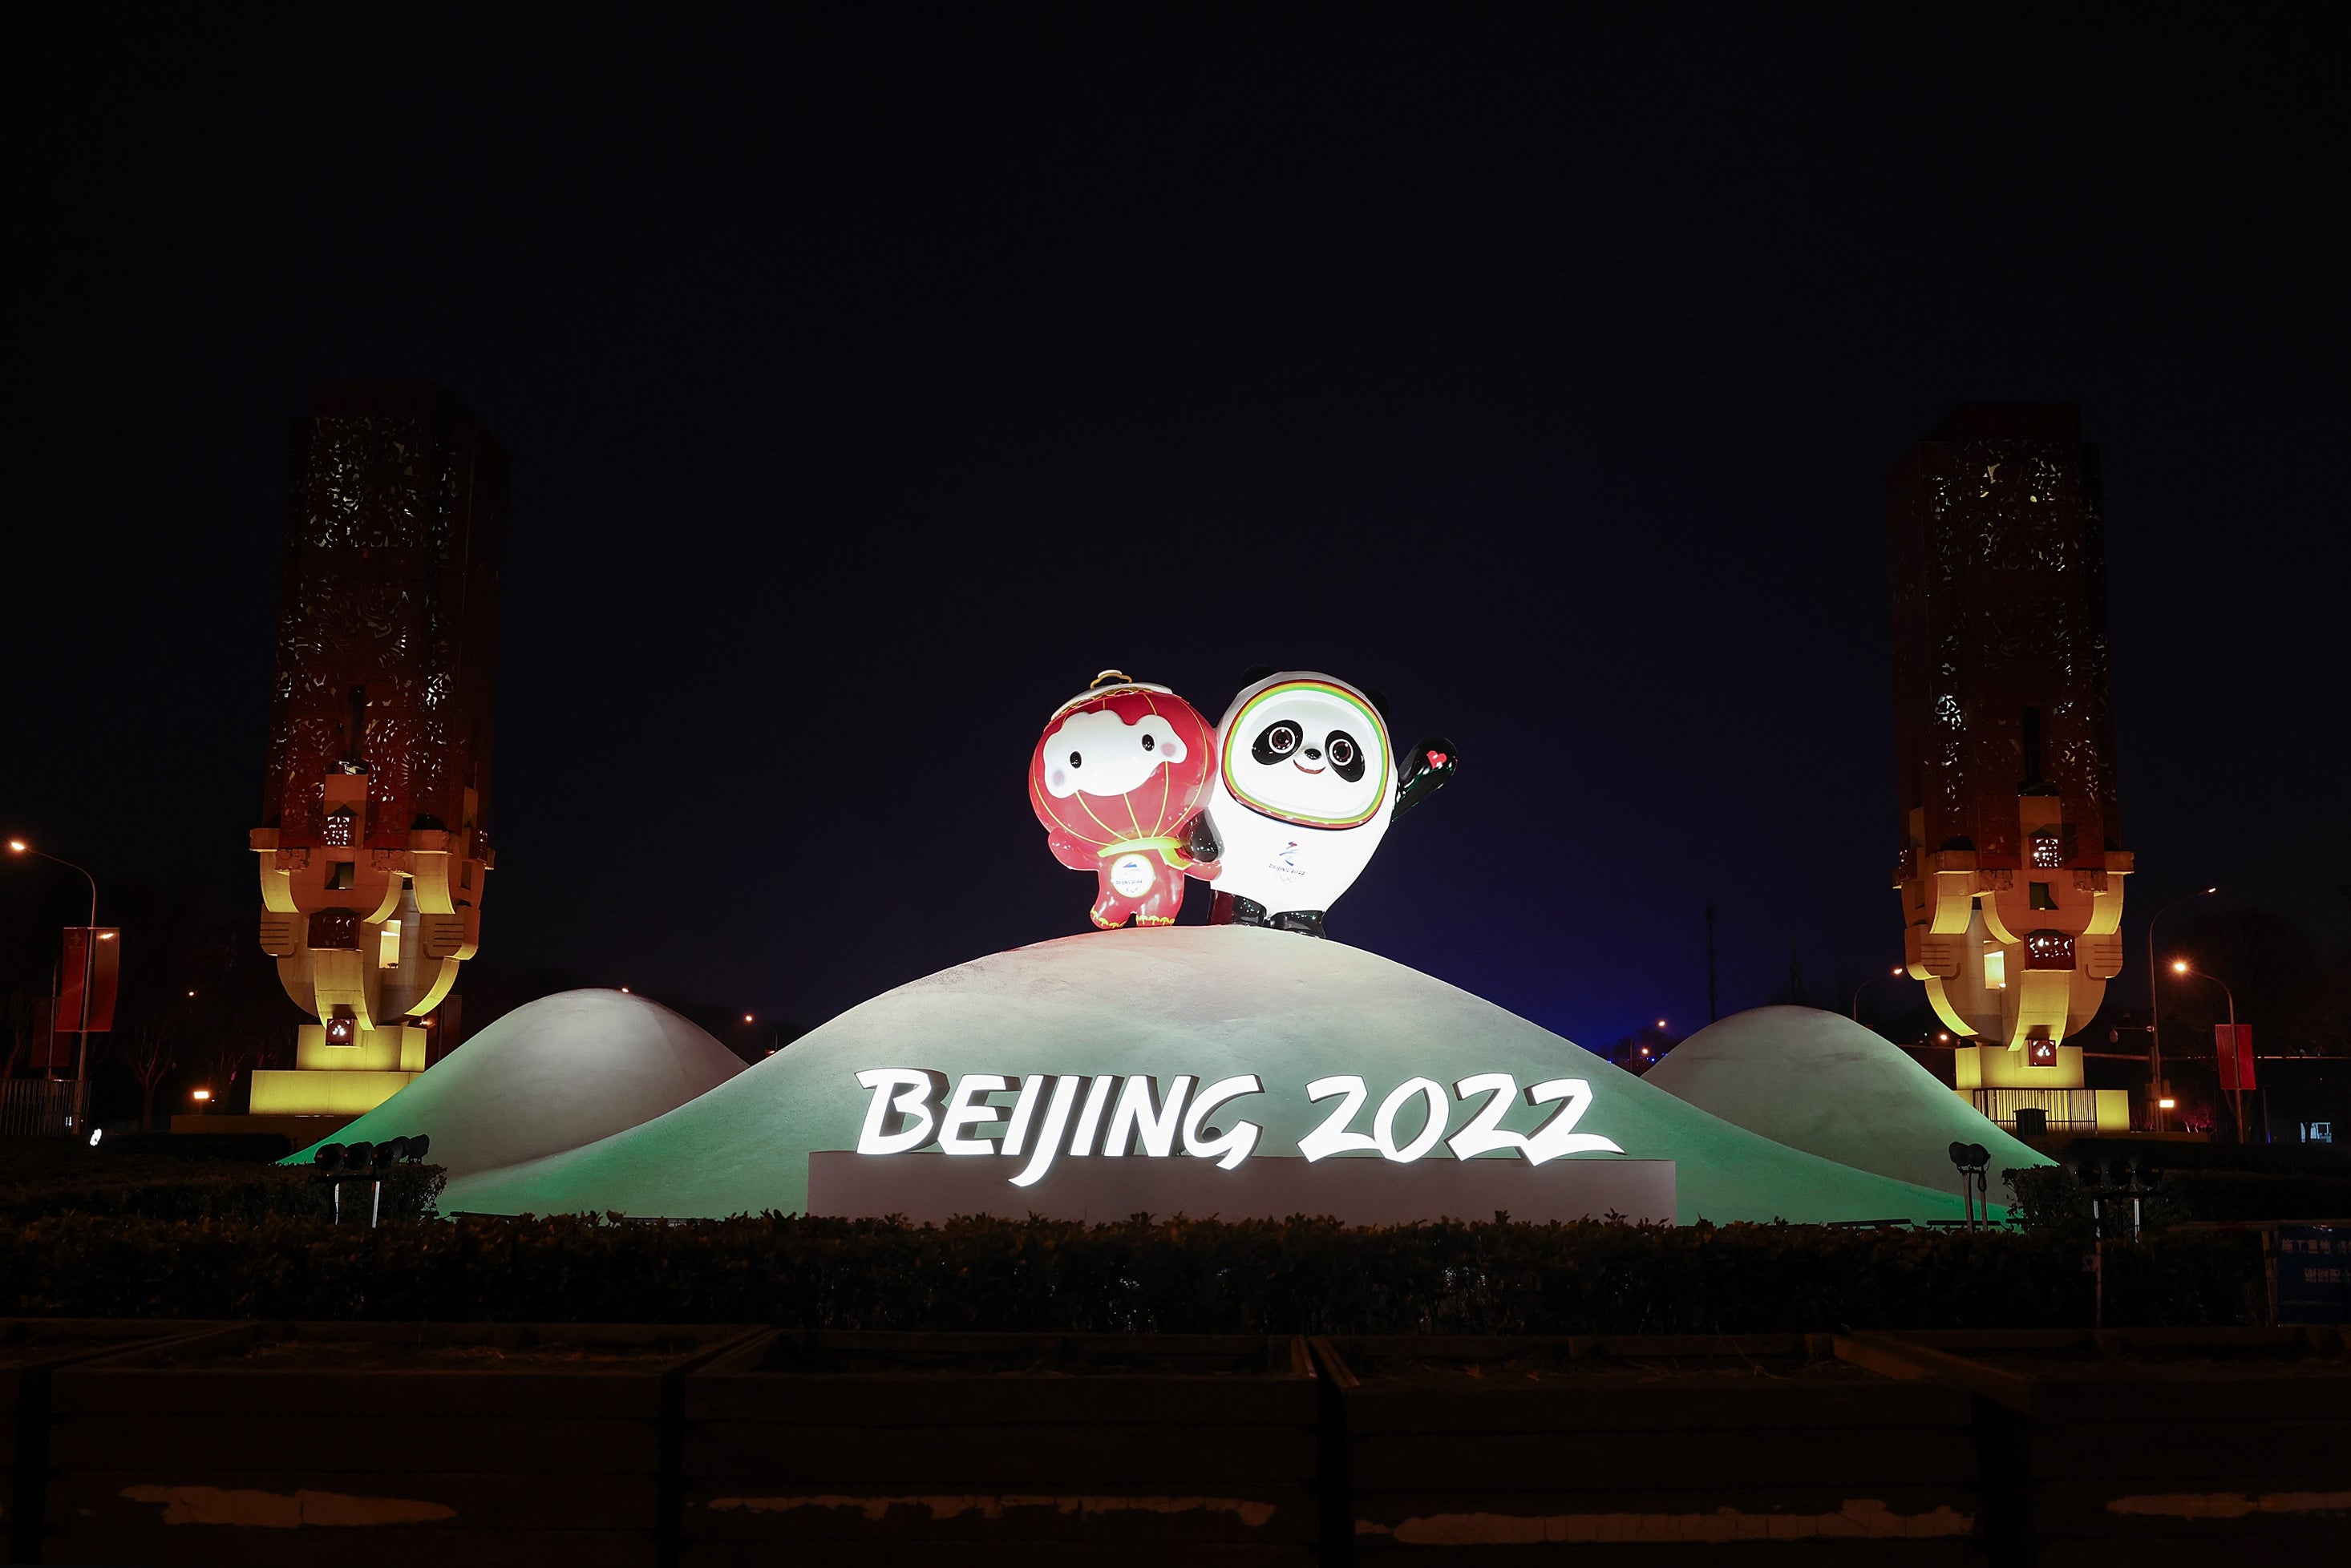 Beijing will become the first city to host both a Summer and Winter Olympic Games